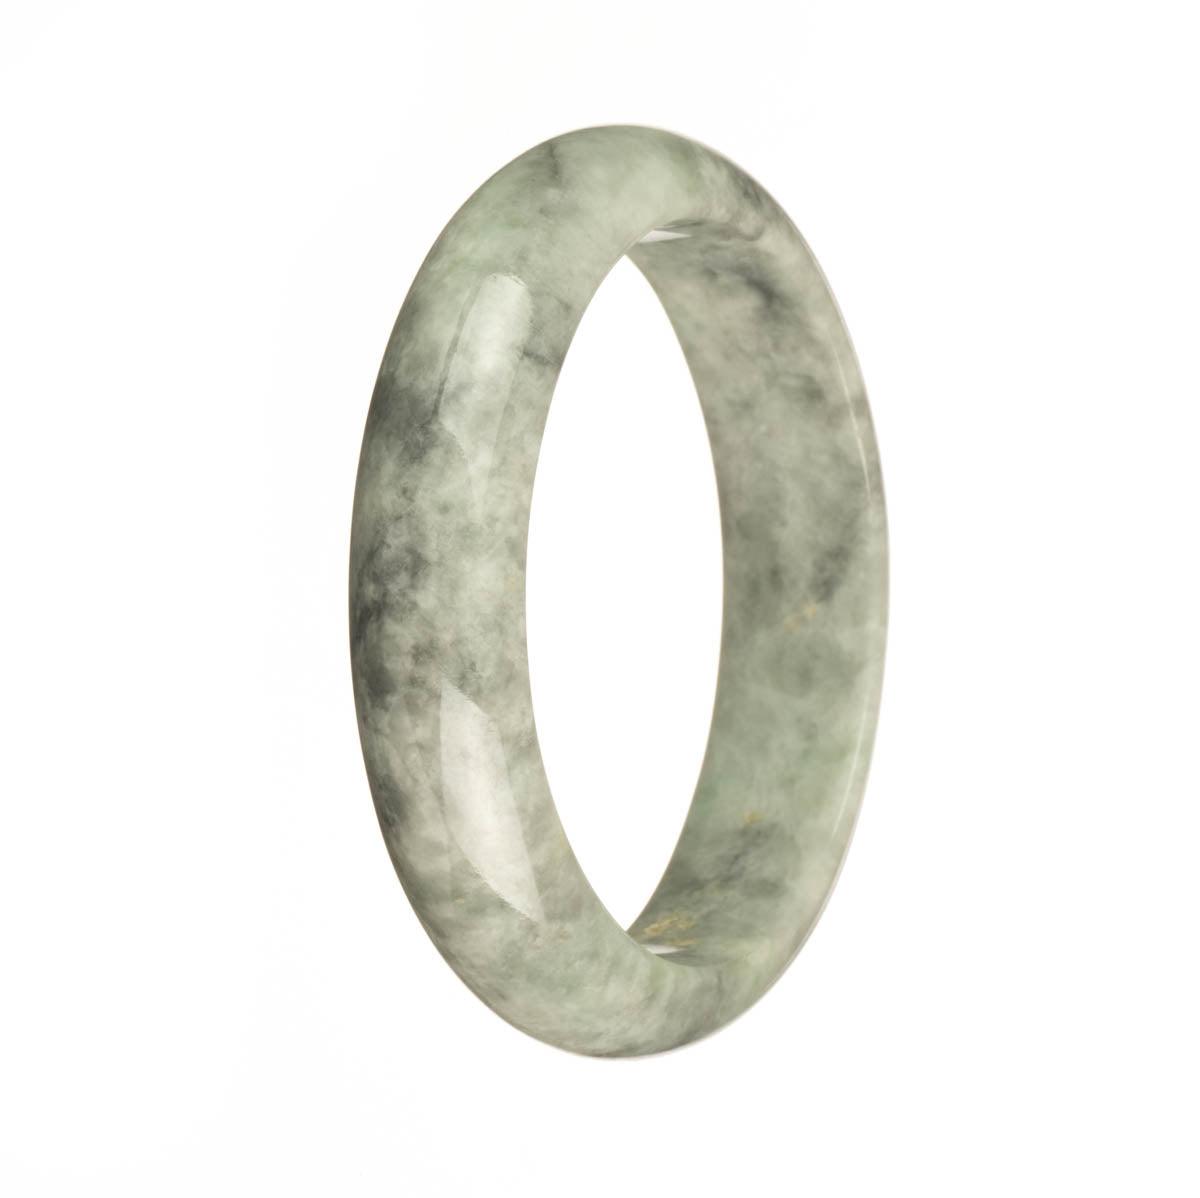 A half moon-shaped bangle bracelet made of genuine untreated Burmese jade, featuring a beautiful white color with a grey pattern.